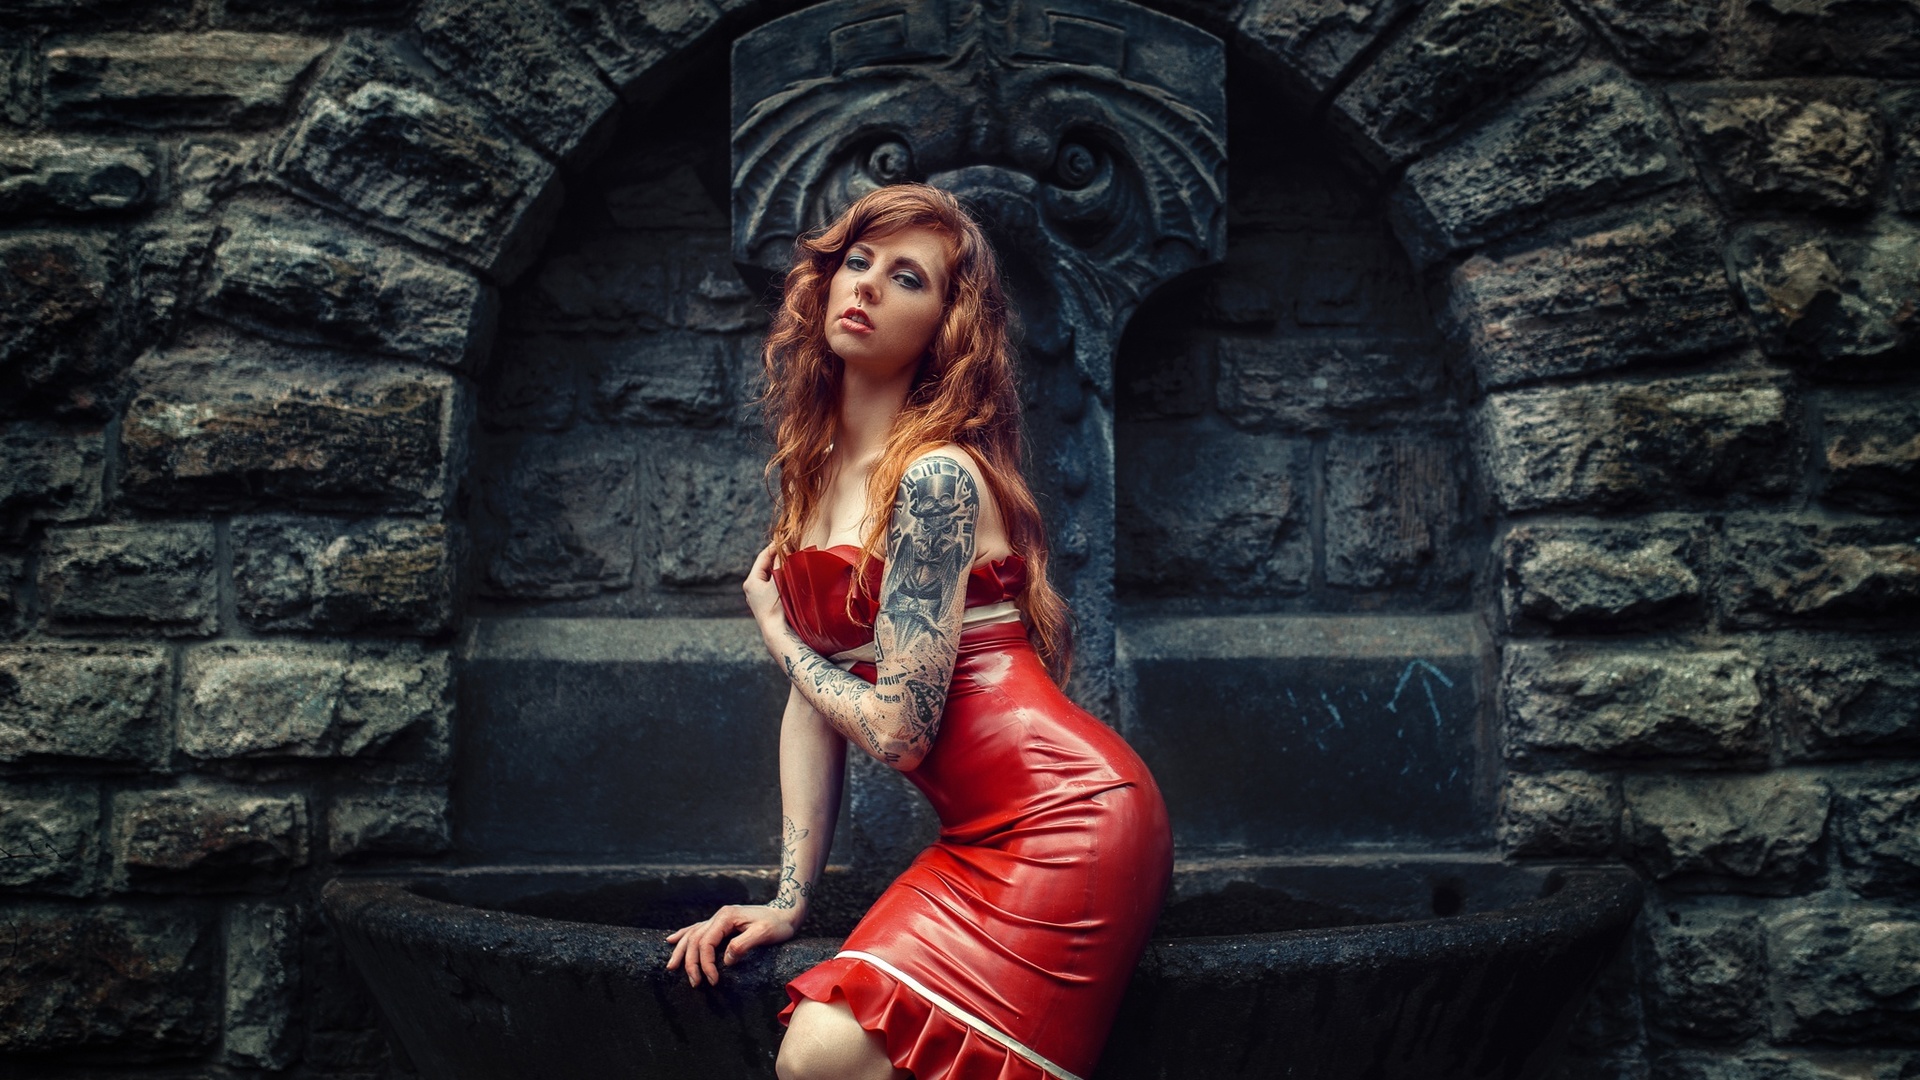 model, fountain, tattoo, redhead, girl, red dress, latex, red, julia wendt, style, pose